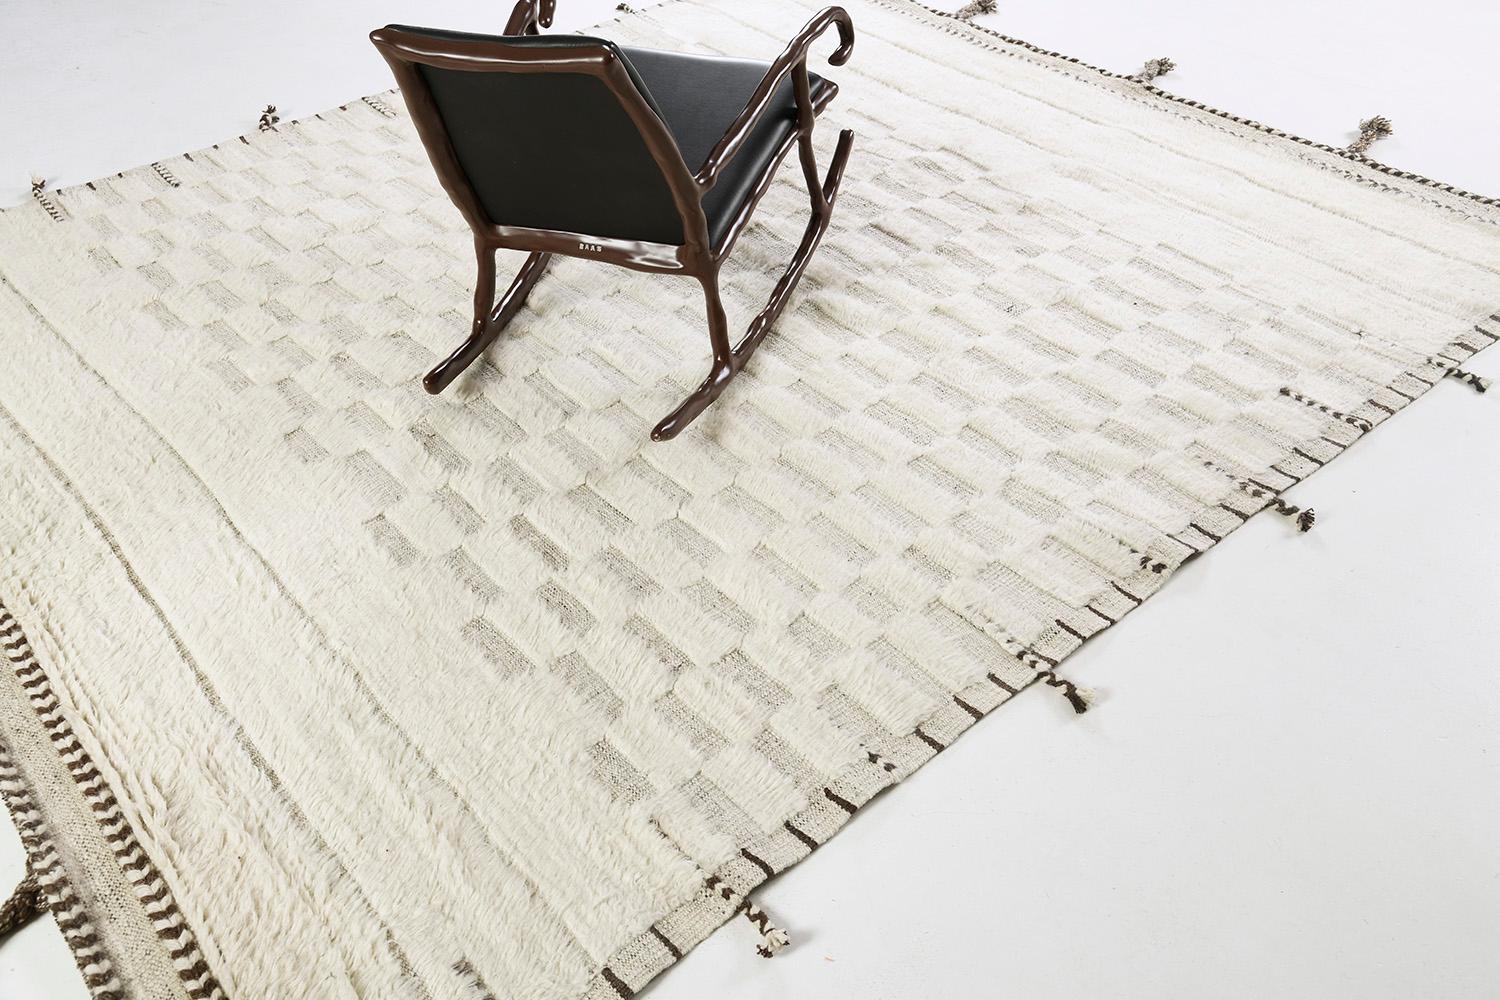 Sirocco' is a stunning handwoven ivory rug with embossed detailing in a checkered pattern atop a natural gray pile weave. Beautiful tassels and bordered designs add a timely and one-of-a-kind essence for the modern design world. Haute Bohemian